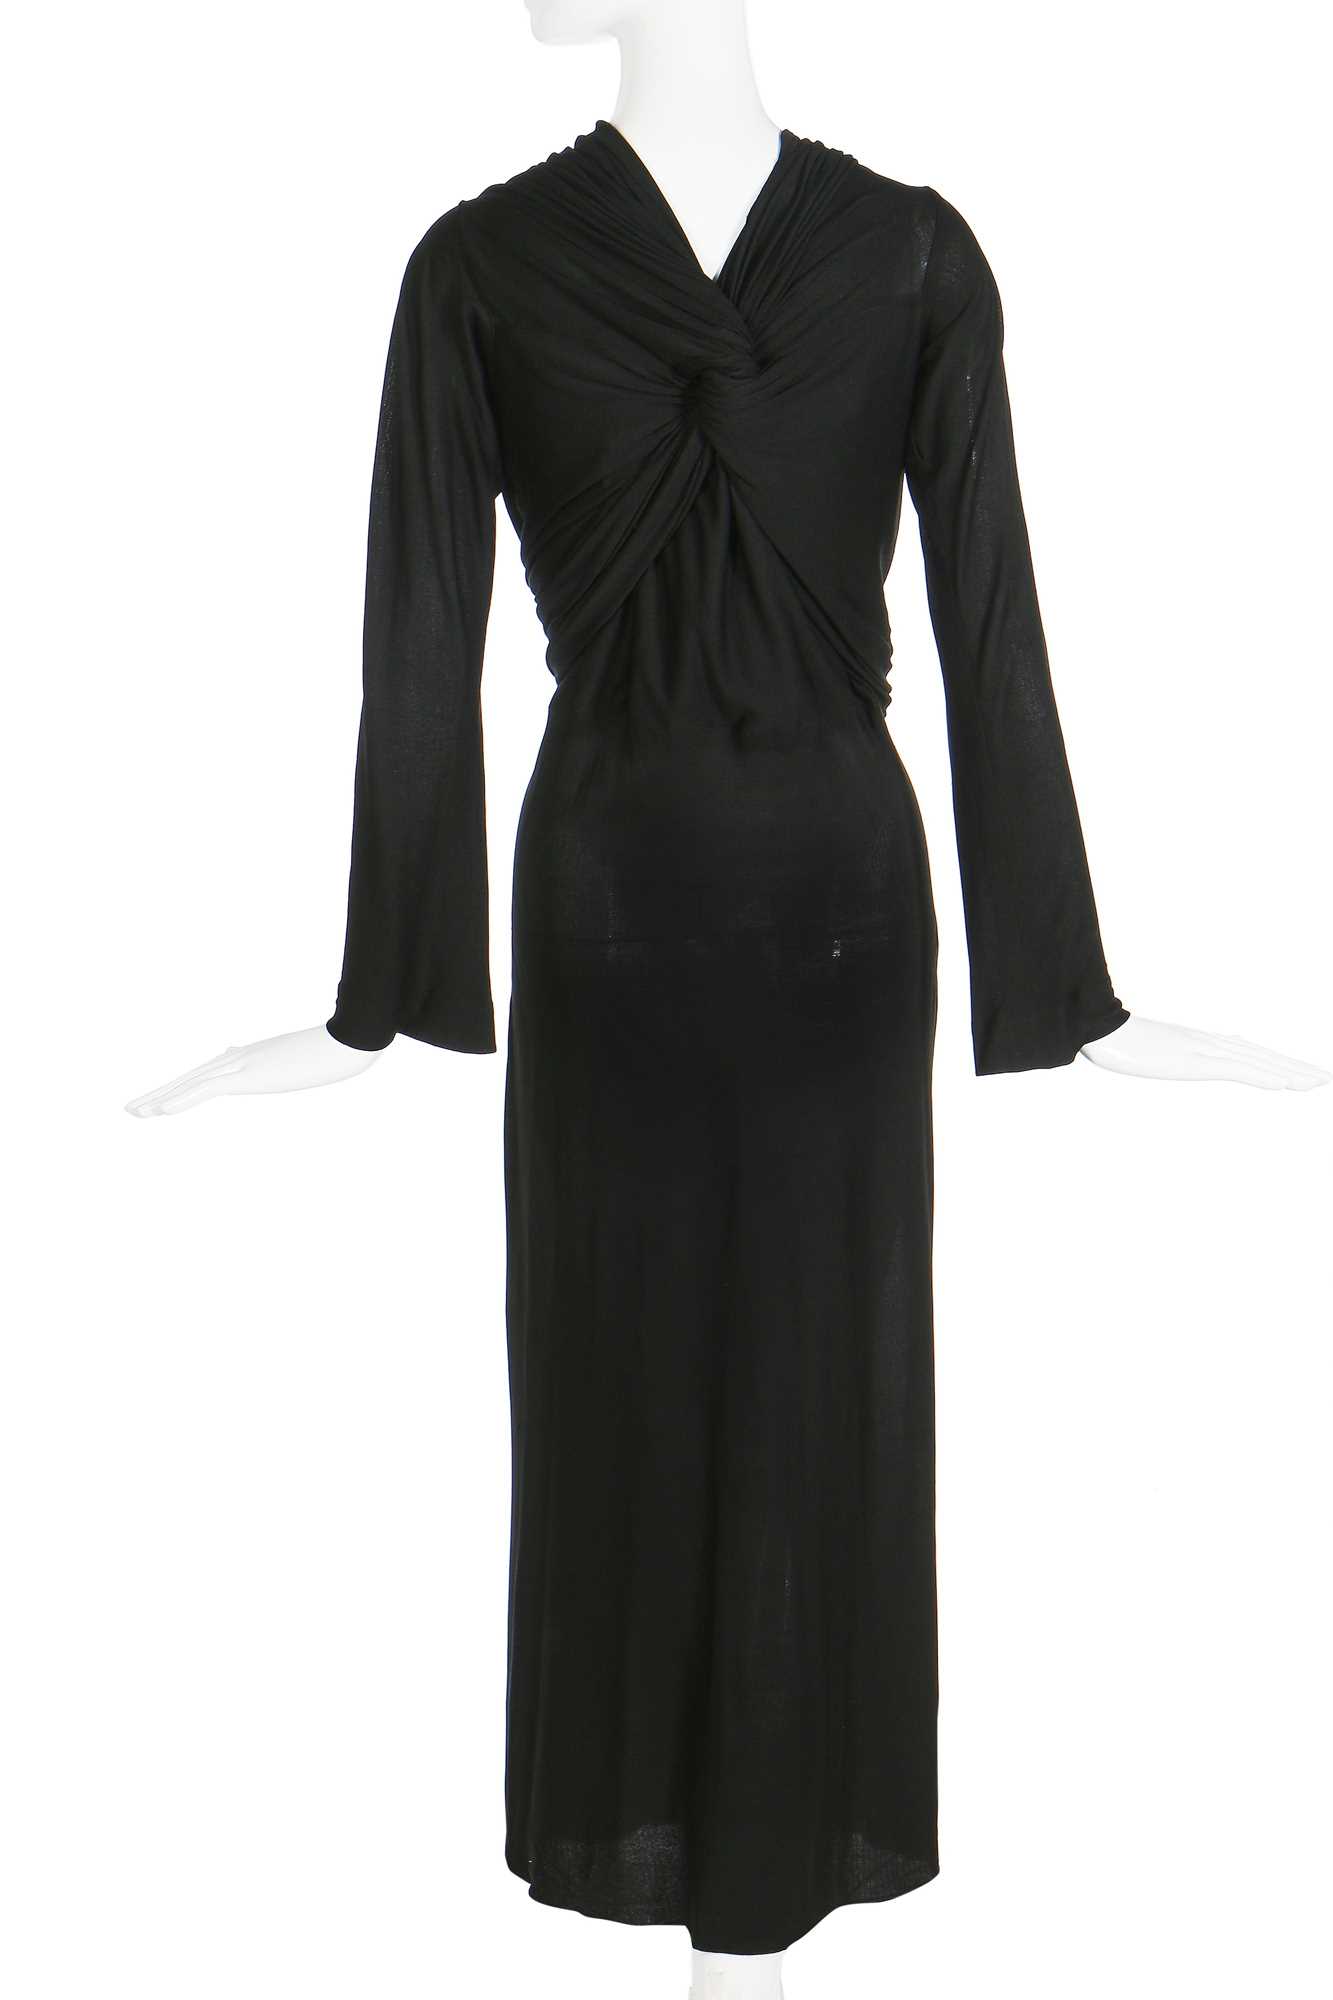 Lot 67 - A rare and early Alix / Madame Grès couture draped silk jersey evening gown, circa 1936